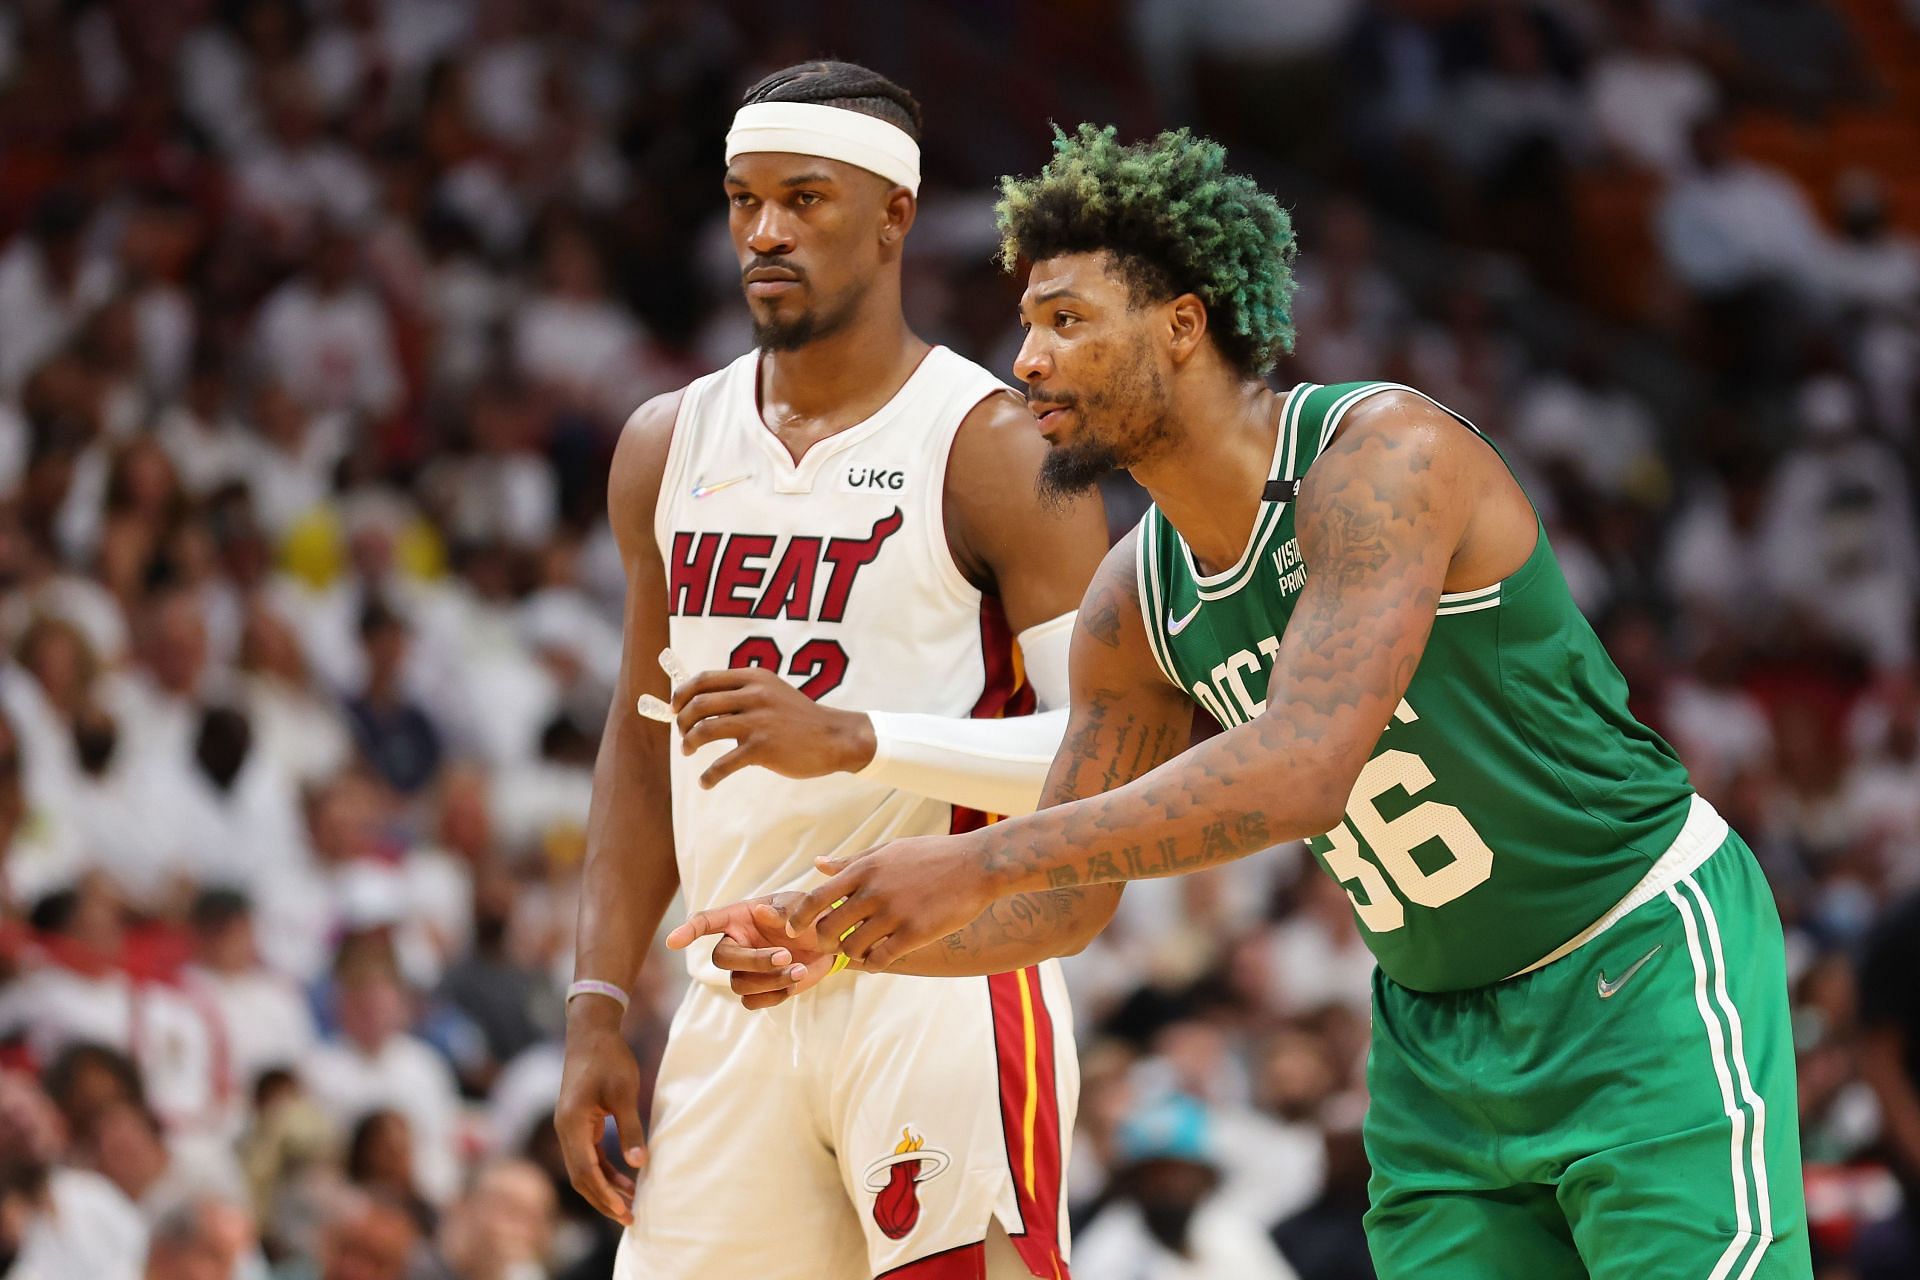 Jimmy Butler of the Miami Heat and Marcus Smart of the Boston Celtics.